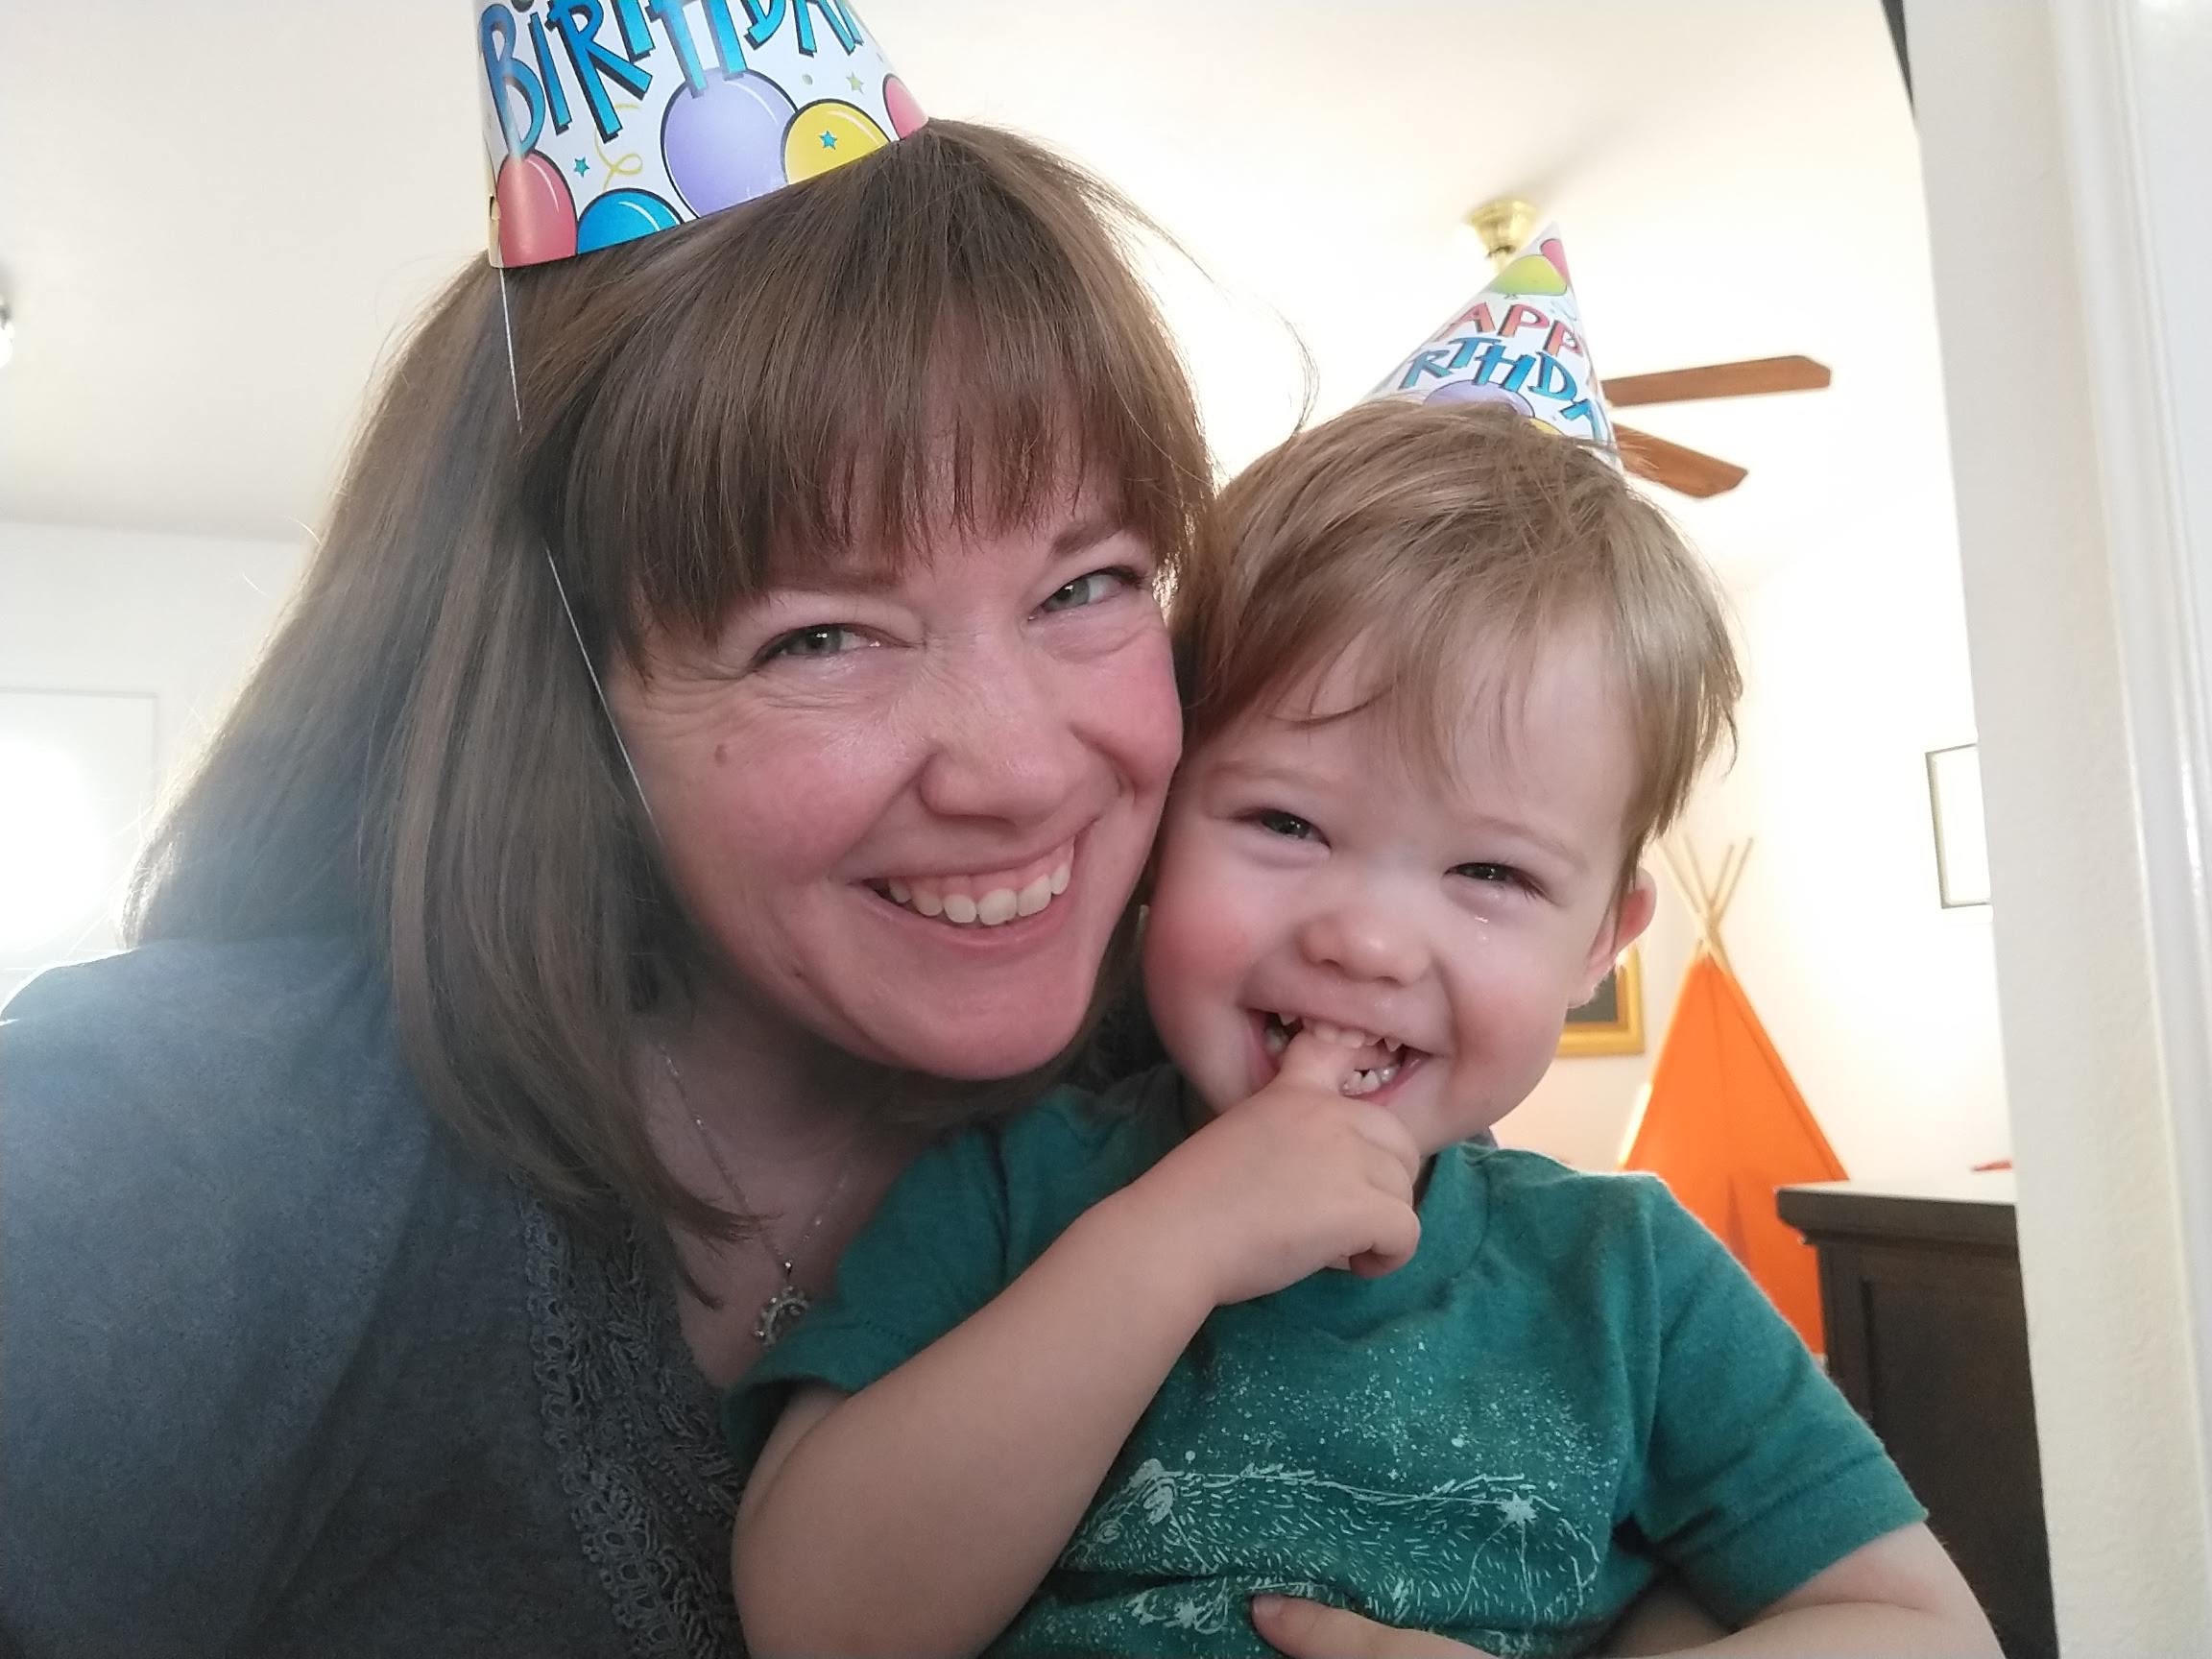 Kelly and Alexander smiling with birthday hats on